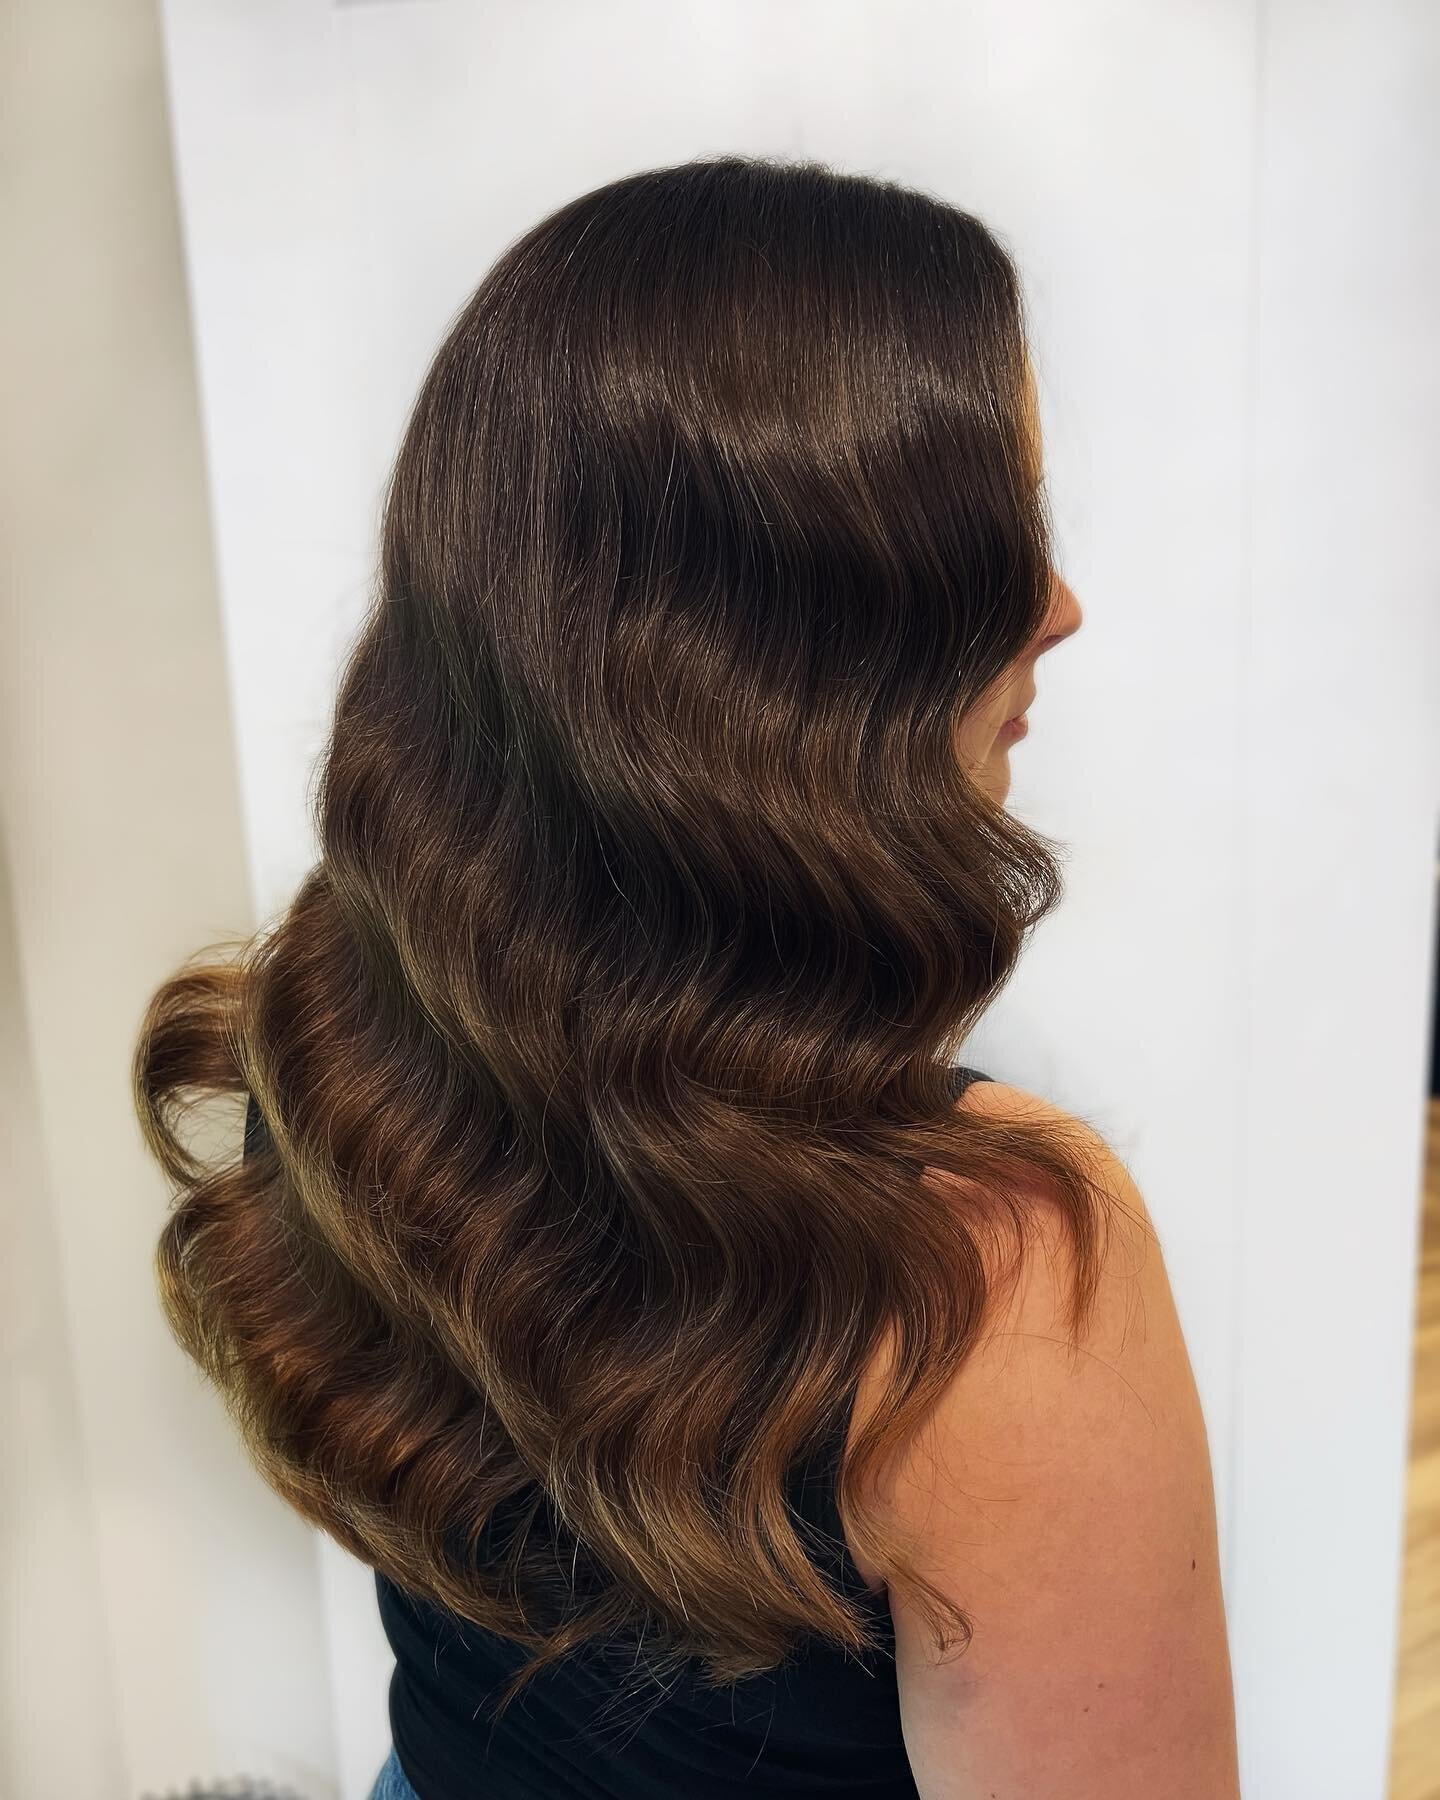 Hollywood Waves 🤎

This has to be my favourite hairstyle currently!
&bull;
&bull;
&bull;

#hollywoodwaves #bridalhair #hair #hairstylist #bridalmakeup #bride #weddinghair #waves #hairstyles #weddingmakeup #weddinghairstyle #bridetobe #hairgoals #mak